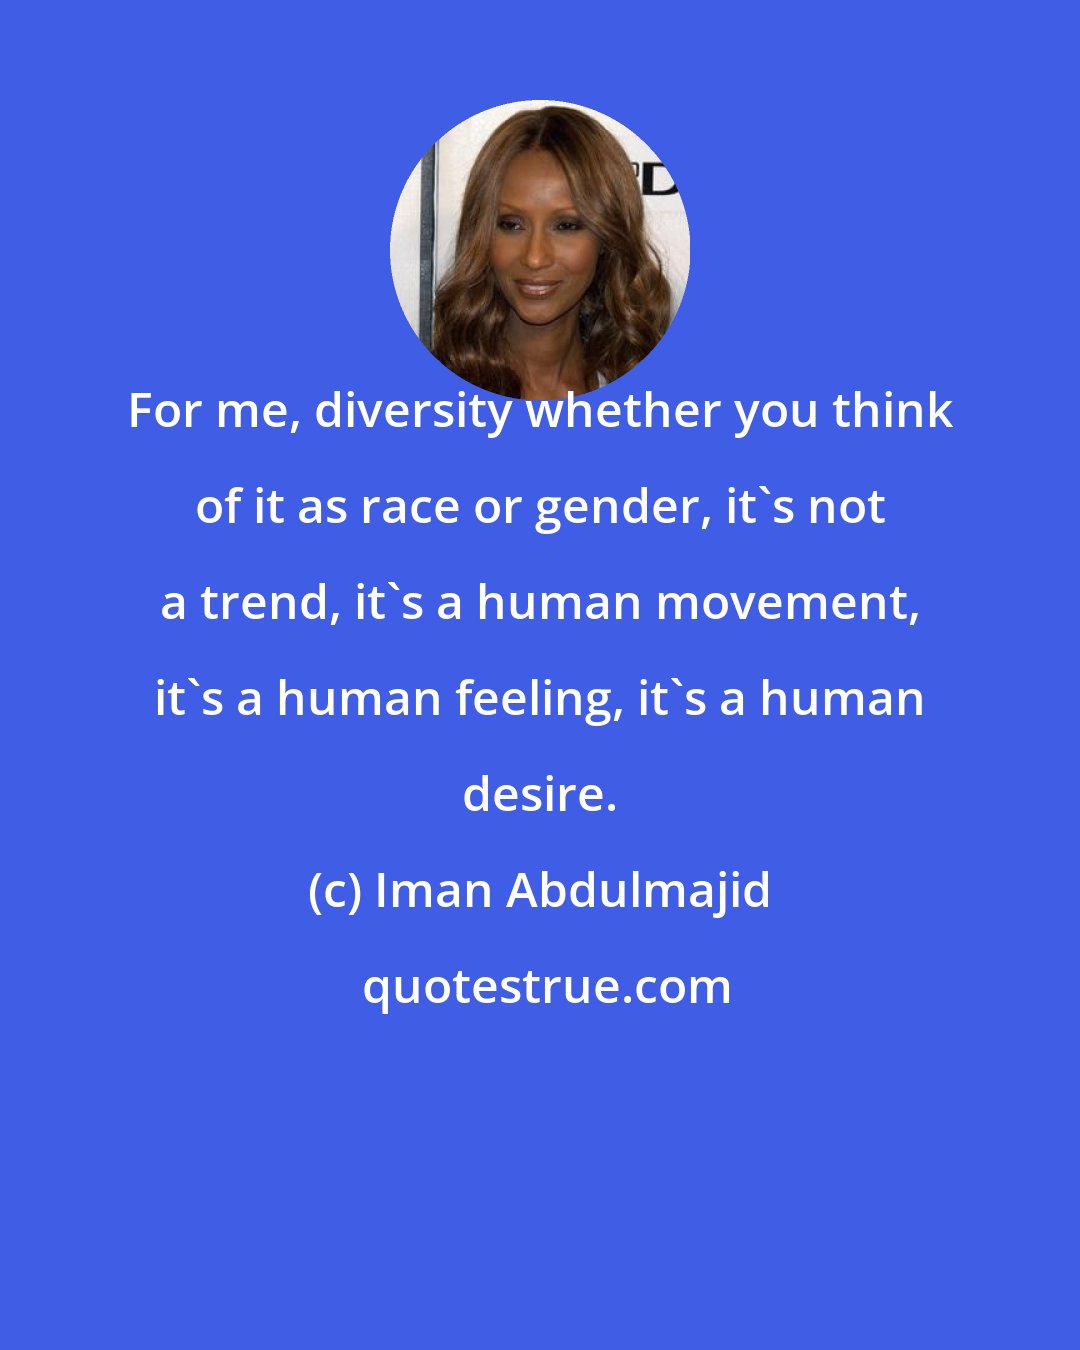 Iman Abdulmajid: For me, diversity whether you think of it as race or gender, it's not a trend, it's a human movement, it's a human feeling, it's a human desire.